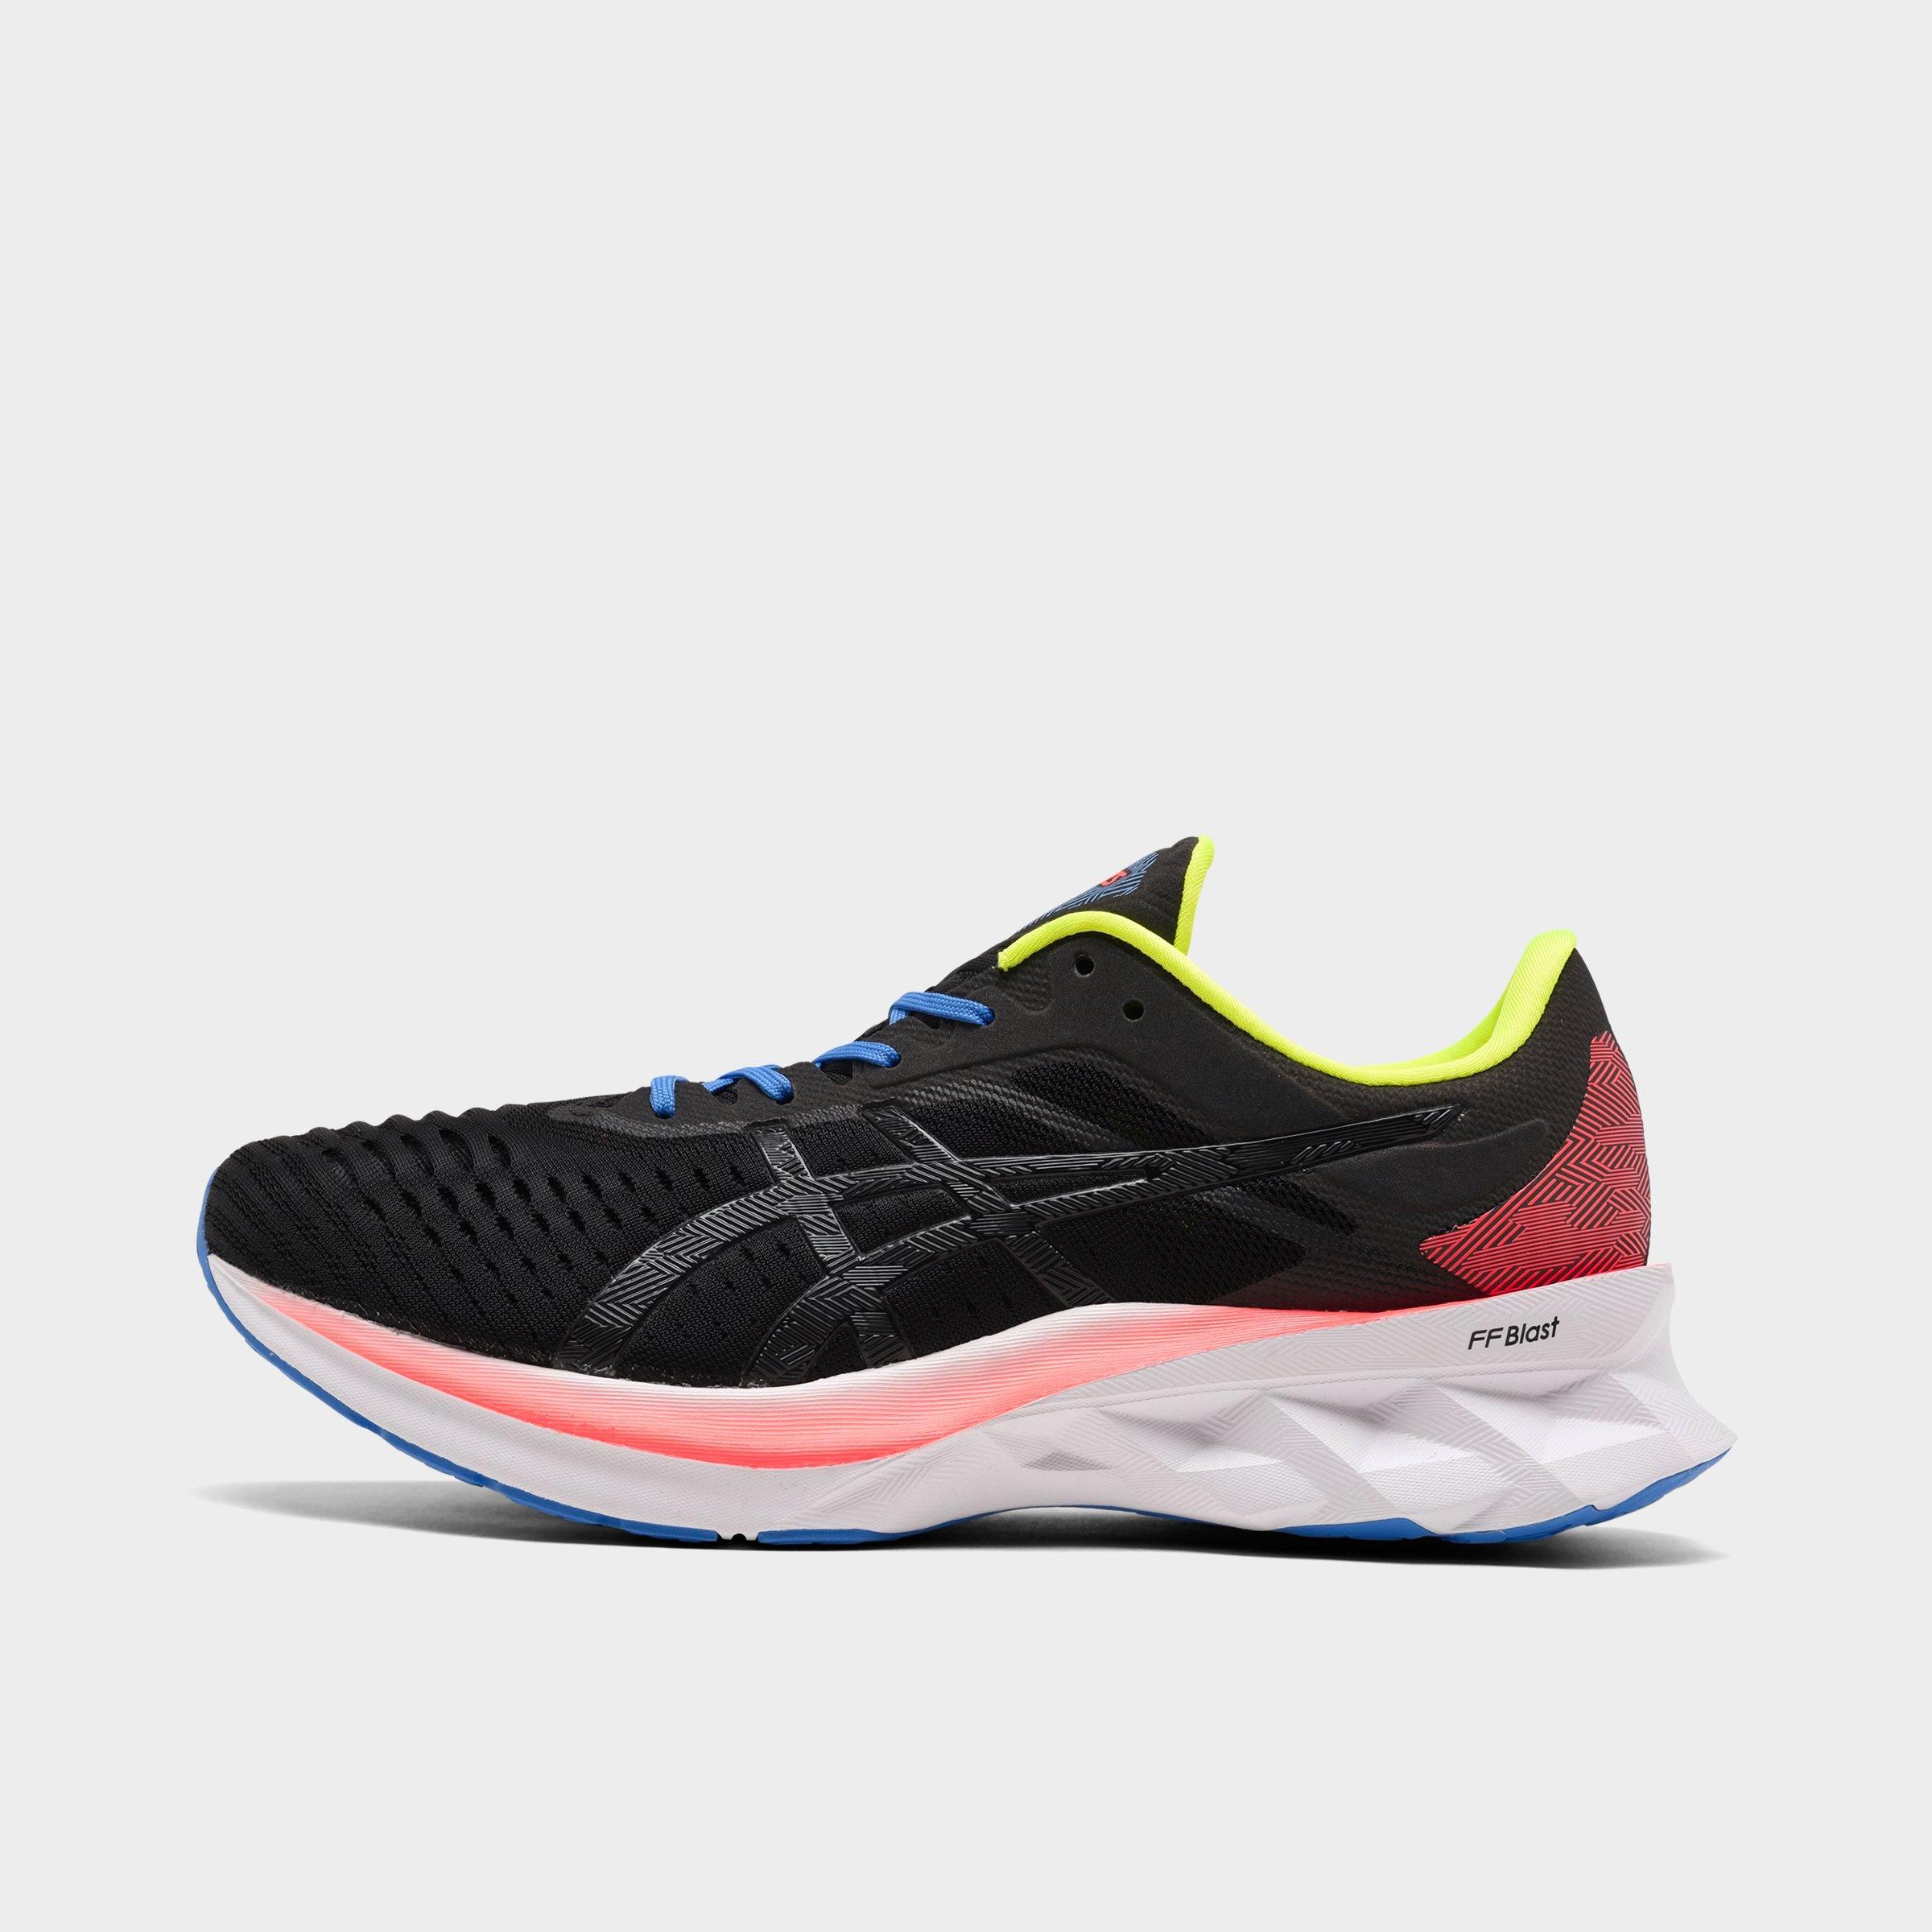 asics shoes afterpay